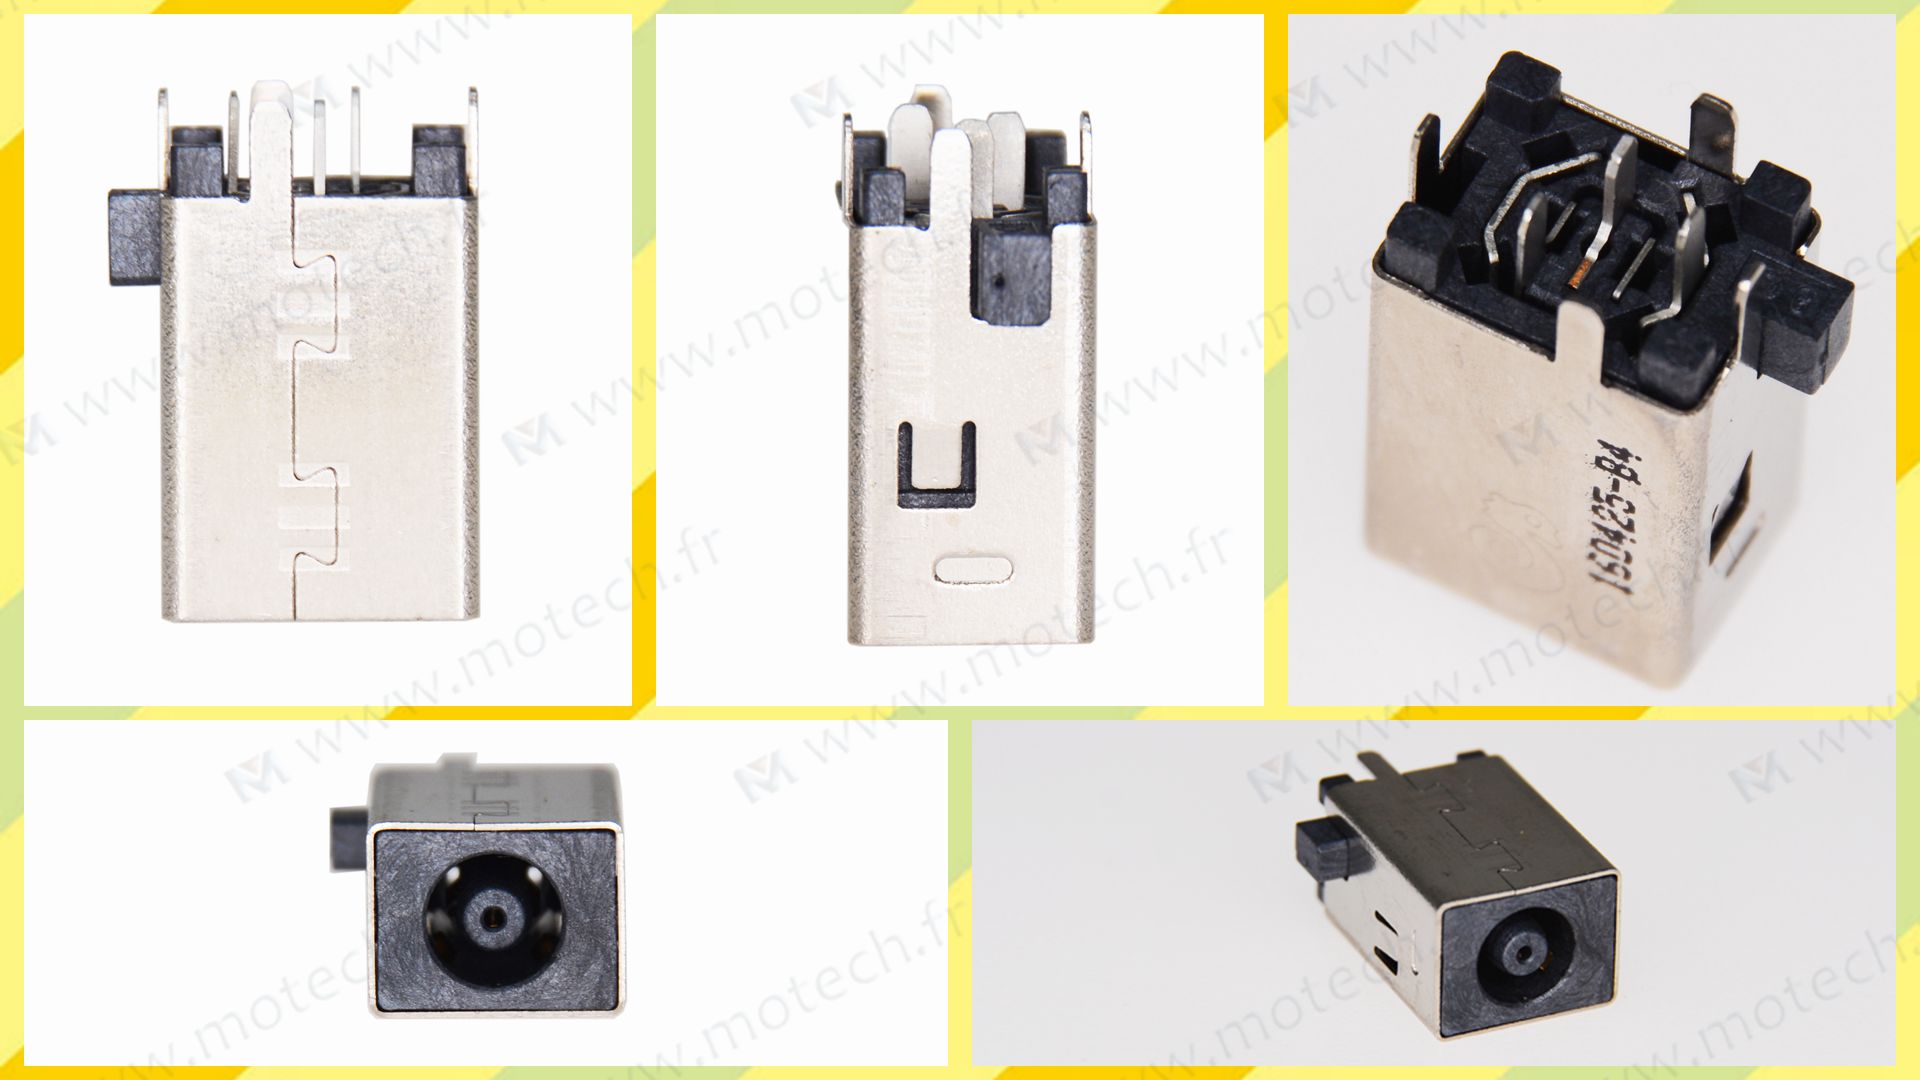 Dell 3000 AIO DC Jack, Dell 3000 AIO Jack alimentation, Dell 3000 AIO Power Jack, Dell 3000 AIO Prise Connecteur, Dell 3000 AIO Connecteur alimentation, Dell 3000 AIO connecteur de charge, 